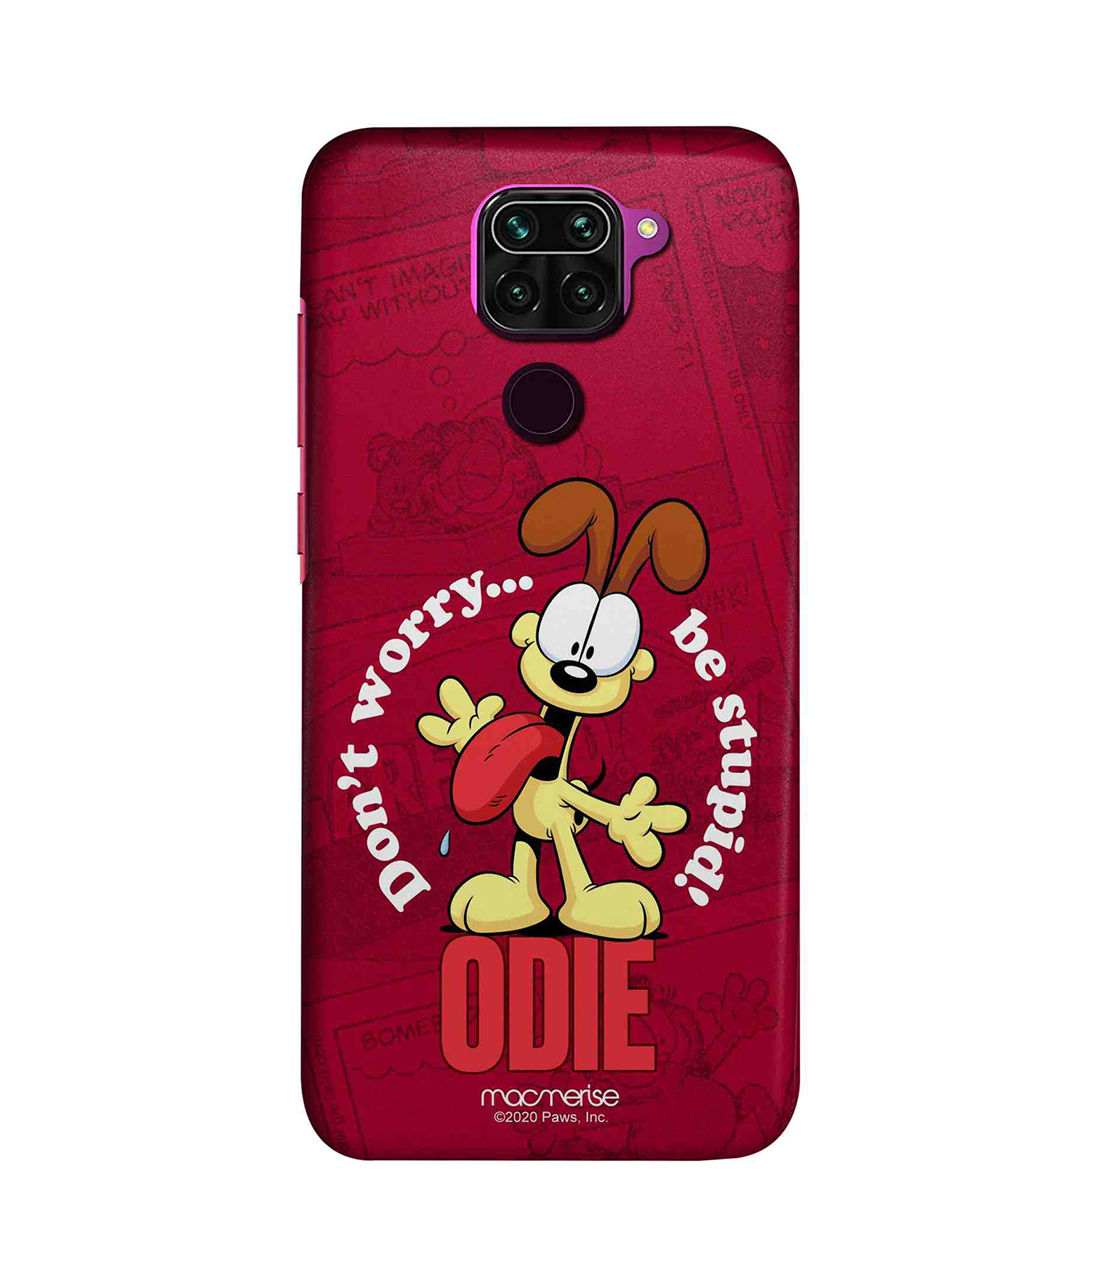 Buy Odie Dont worry Macmerise Sleek Case for iPhone XR Online